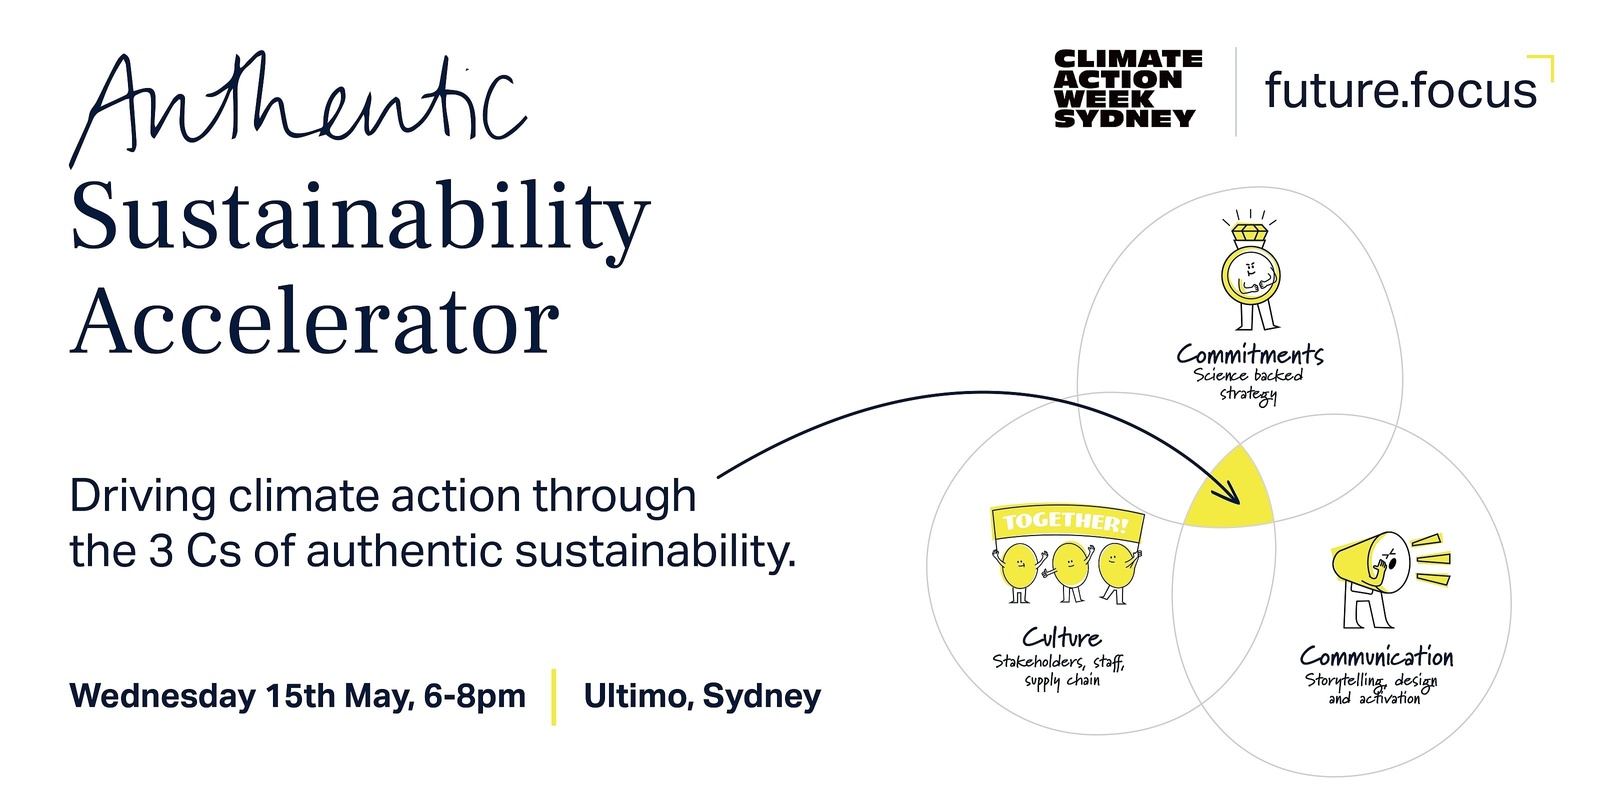 Banner image for Authentic Sustainability Accelerator